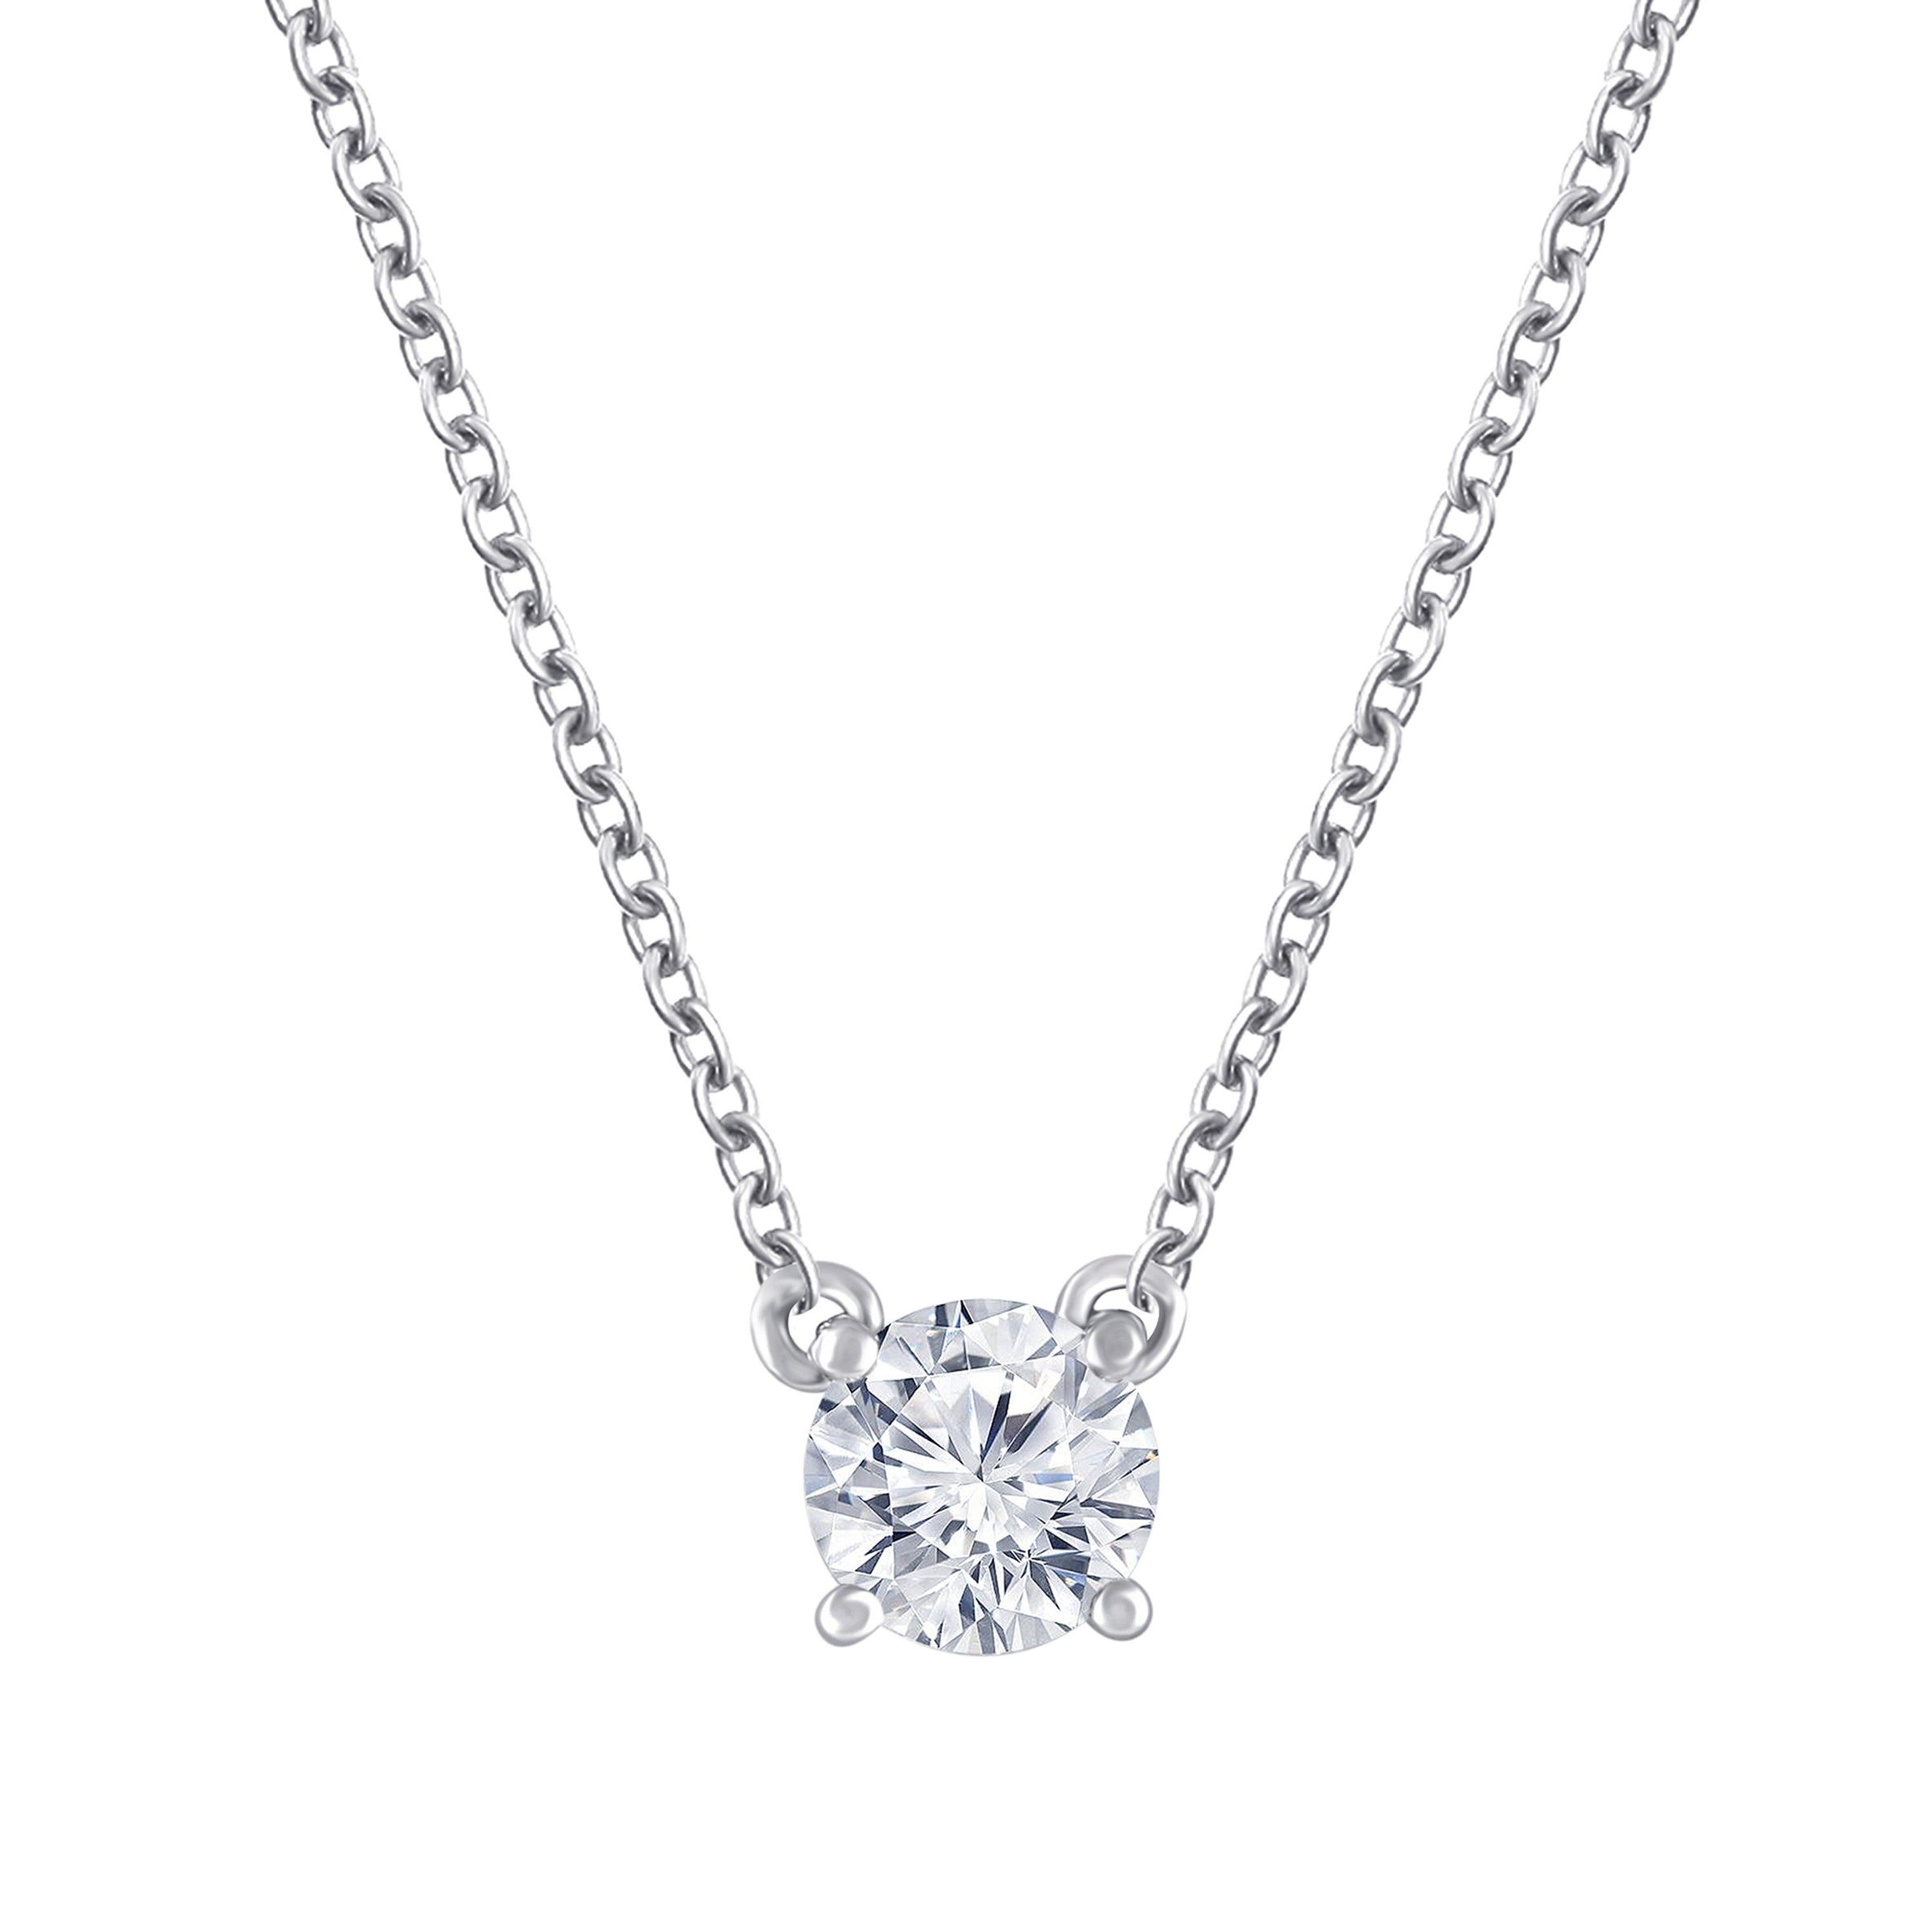 Meera 1/2ct Laboratory Grown Diamond Solitaire Necklace in 9ct White Gold Necklaces Bevilles 